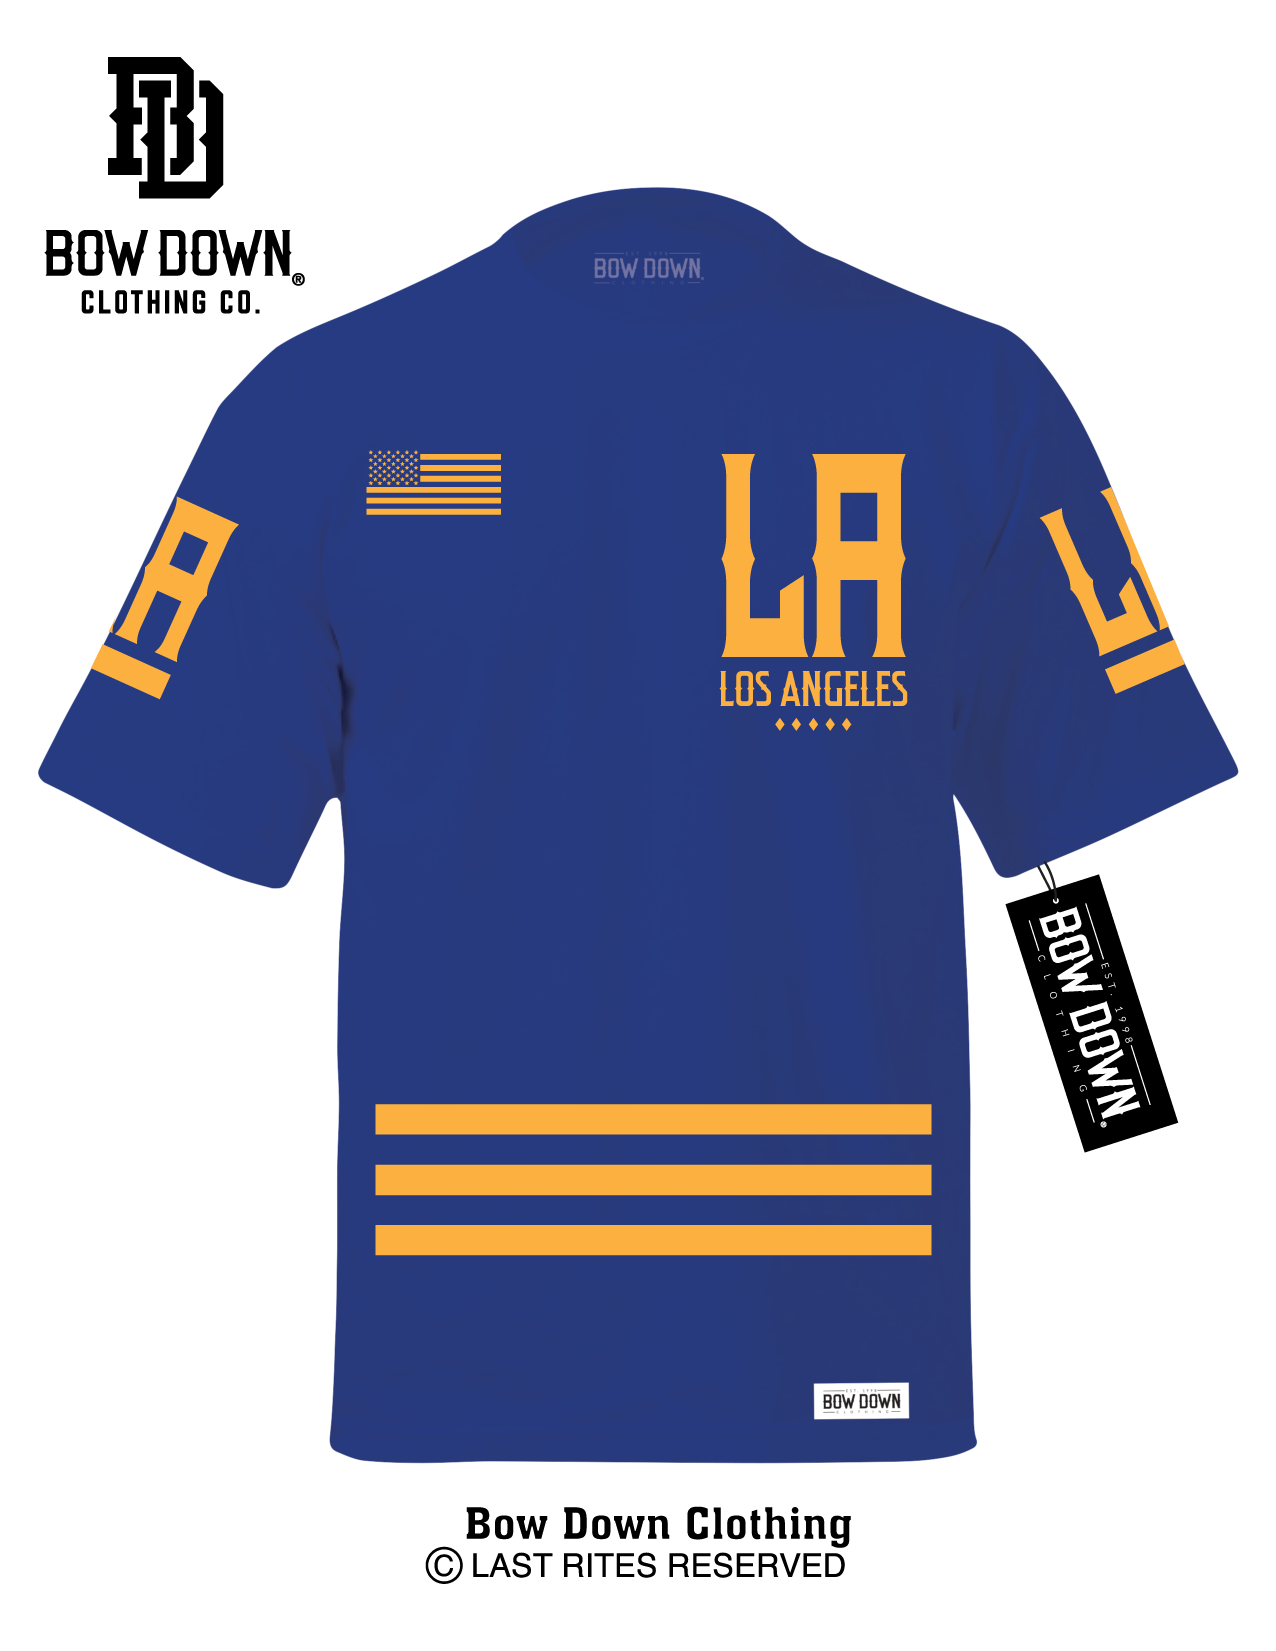 LOS ANGELES JERSEY - GOLD ON ROYAL BLUE T-SHIRT